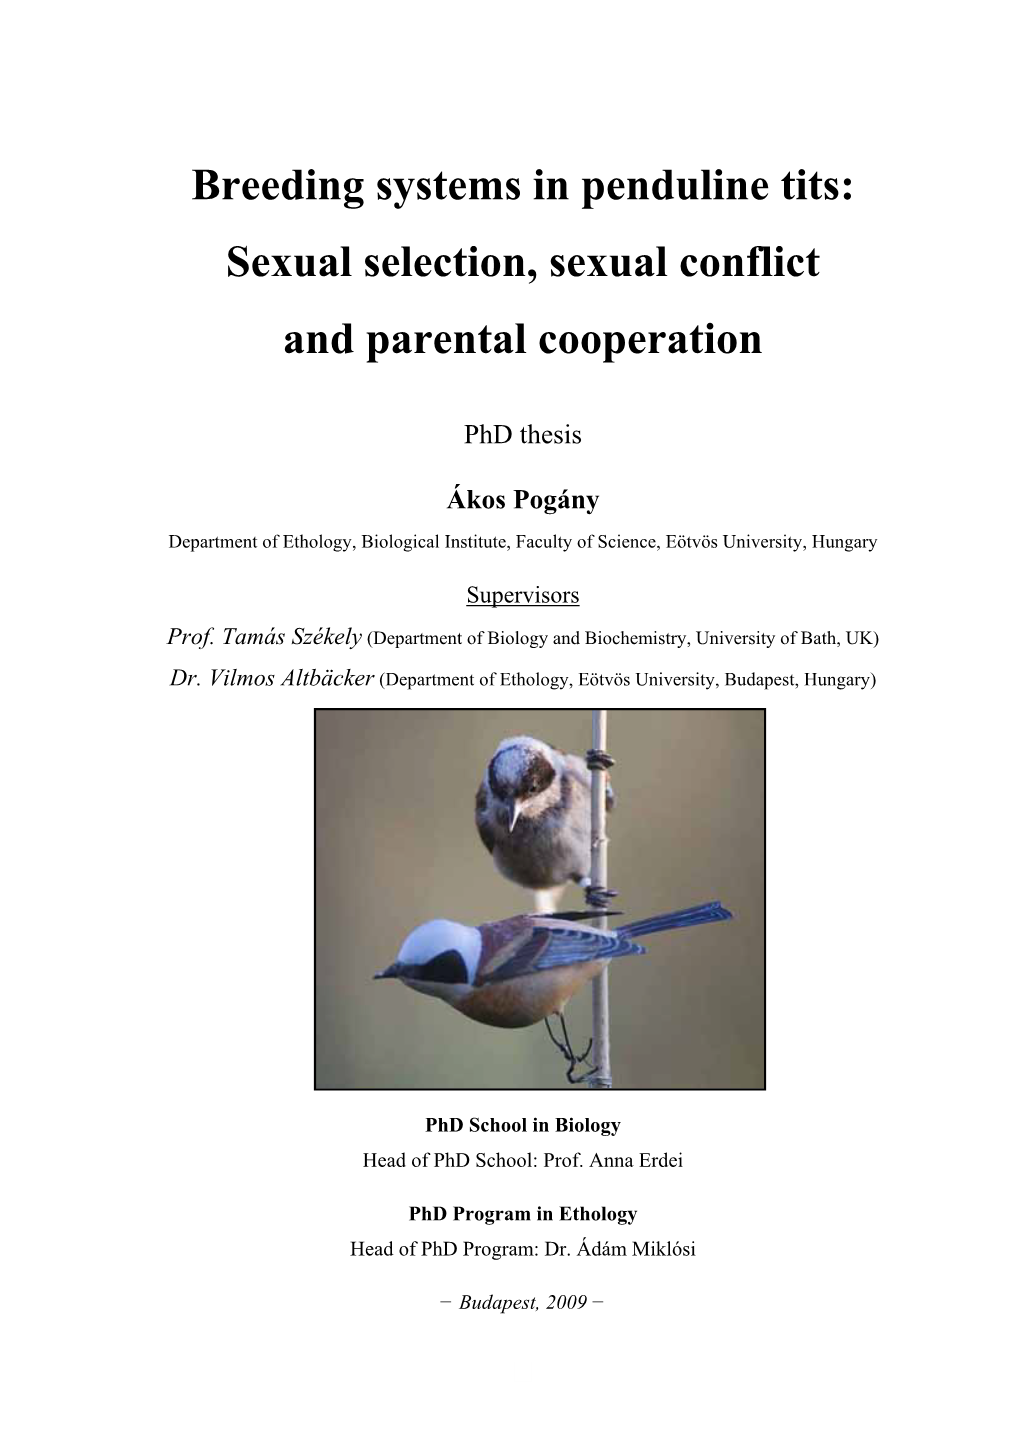 Breeding Systems in Penduline Tits: Sexual Selection, Sexual Conflict and Parental Cooperation